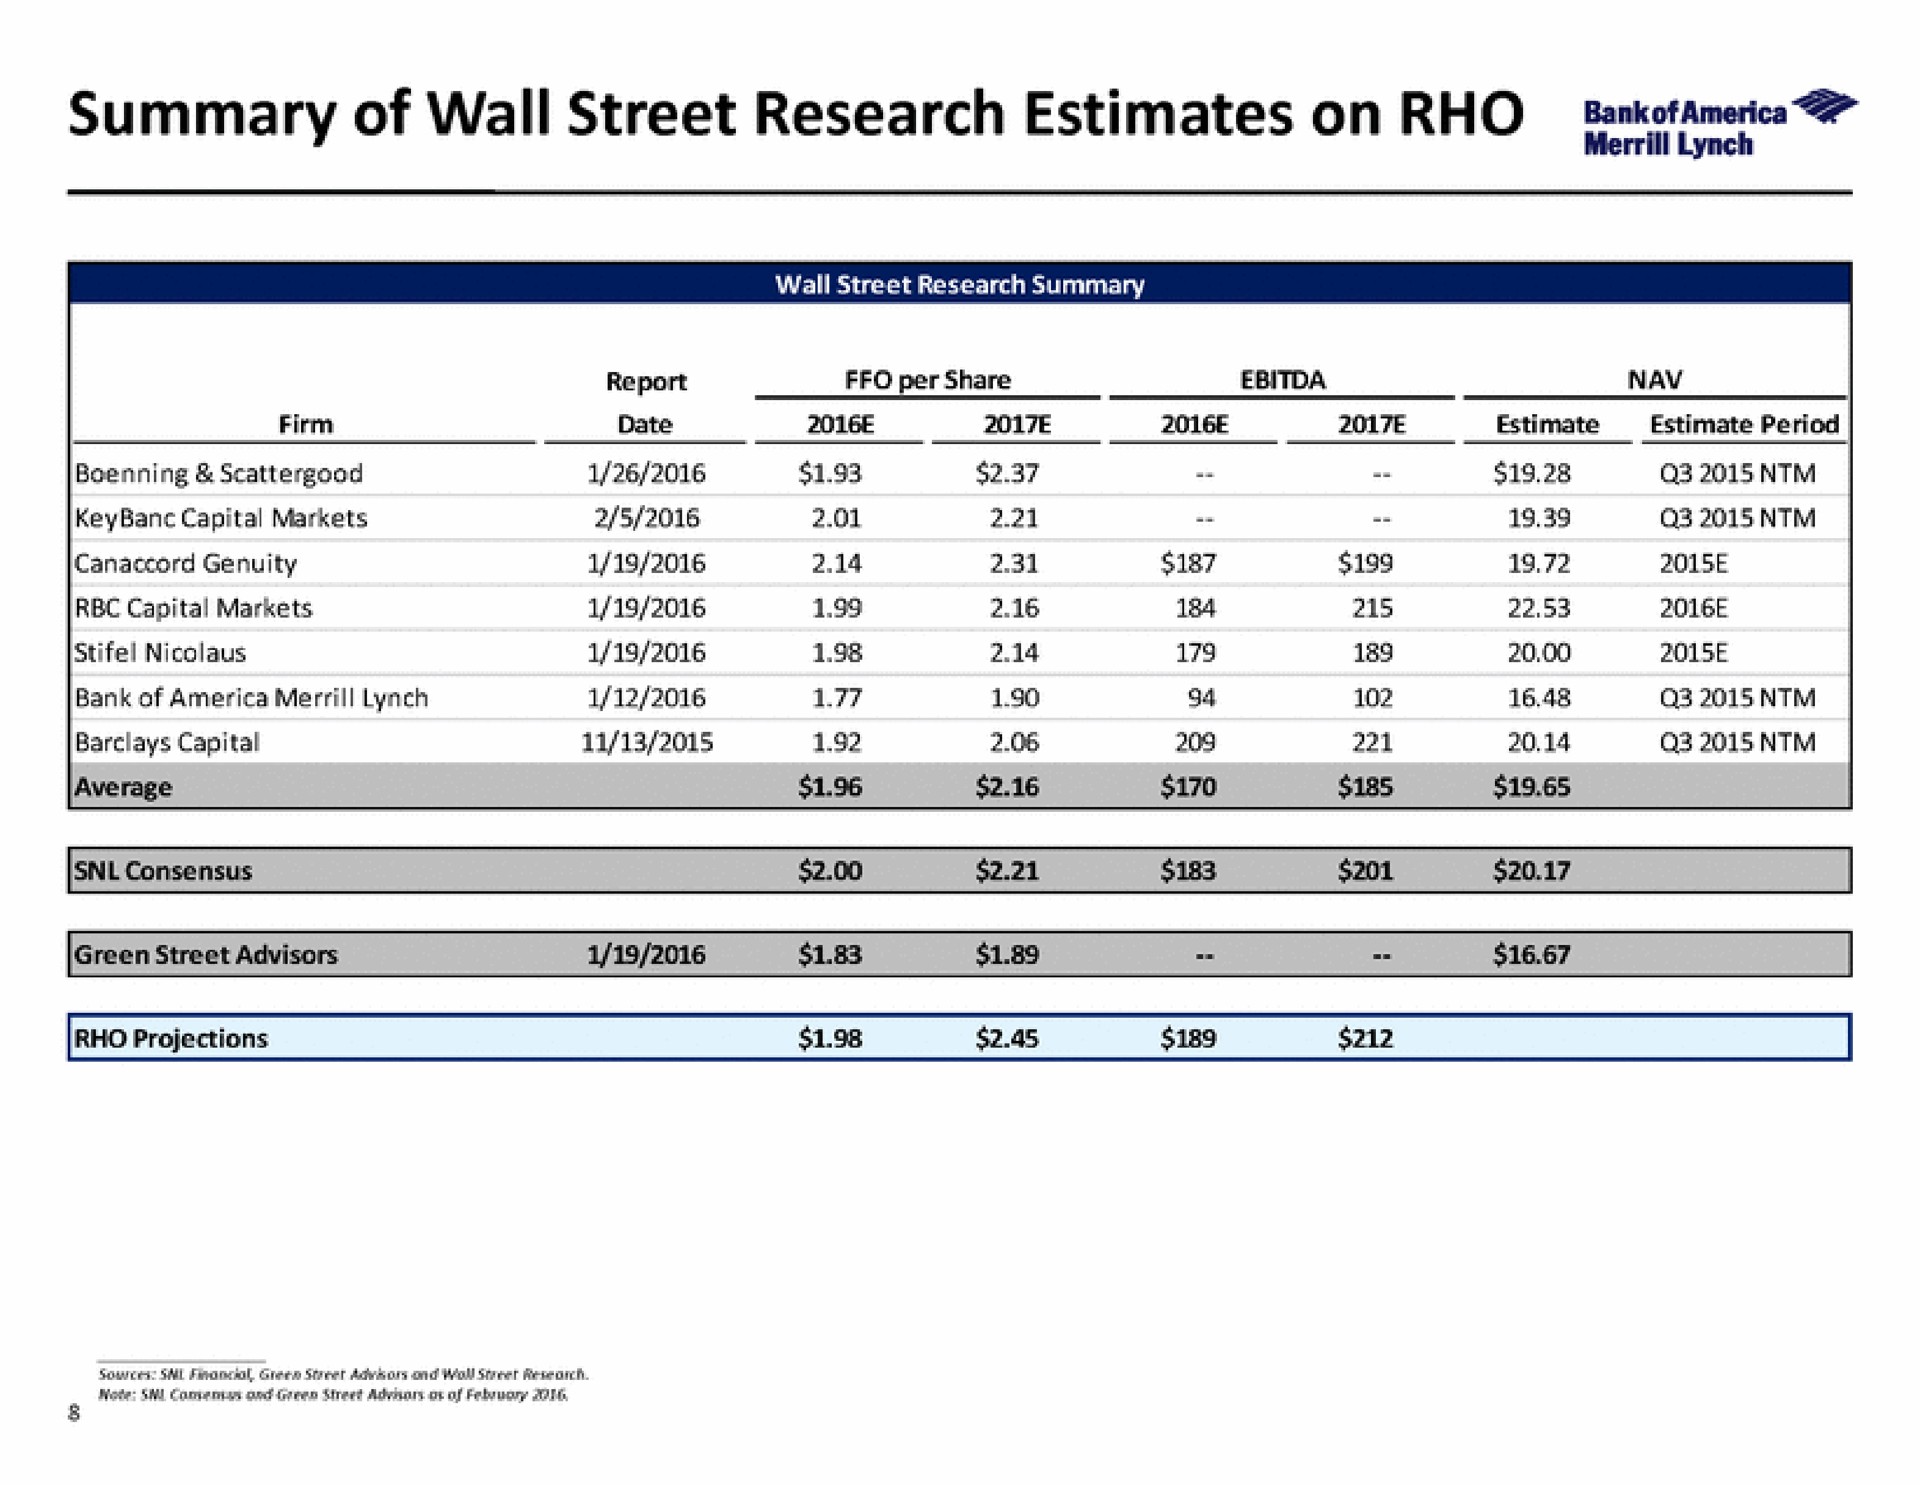 summary of wall street research estimates on rho | Bank of America